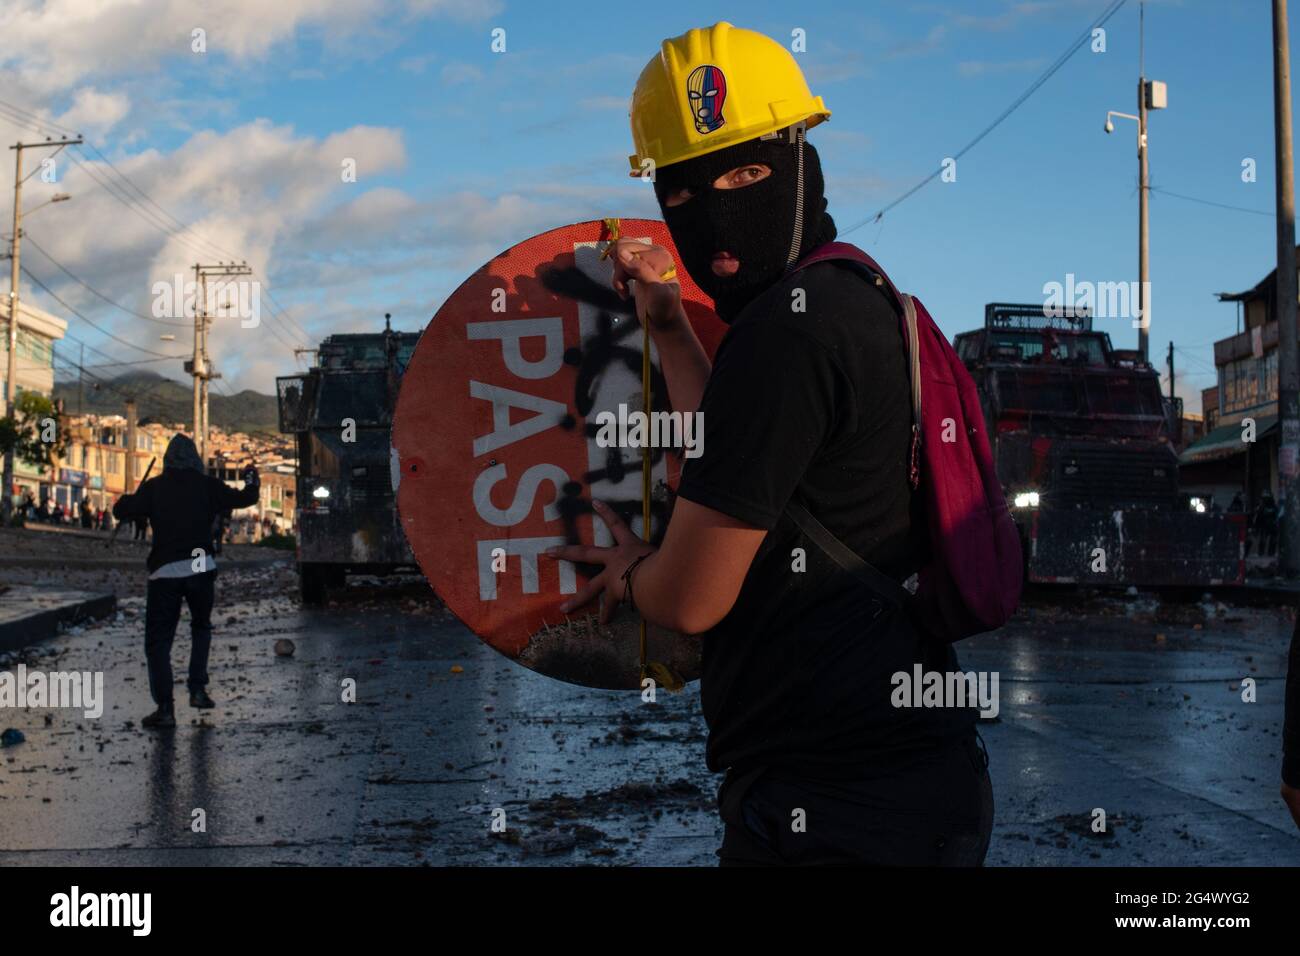 Bogota, Colombia. 21st June, 2021. A demonstrator holds a roadsign as a shield as clashes between demonstratros and Colombia's riot police erupt anti-government protest raise in Bogota Colombia against the government of president Ivan Duque, inequalities and abuse of authority by police. Credit: Long Visual Press/Alamy Live News Stock Photo